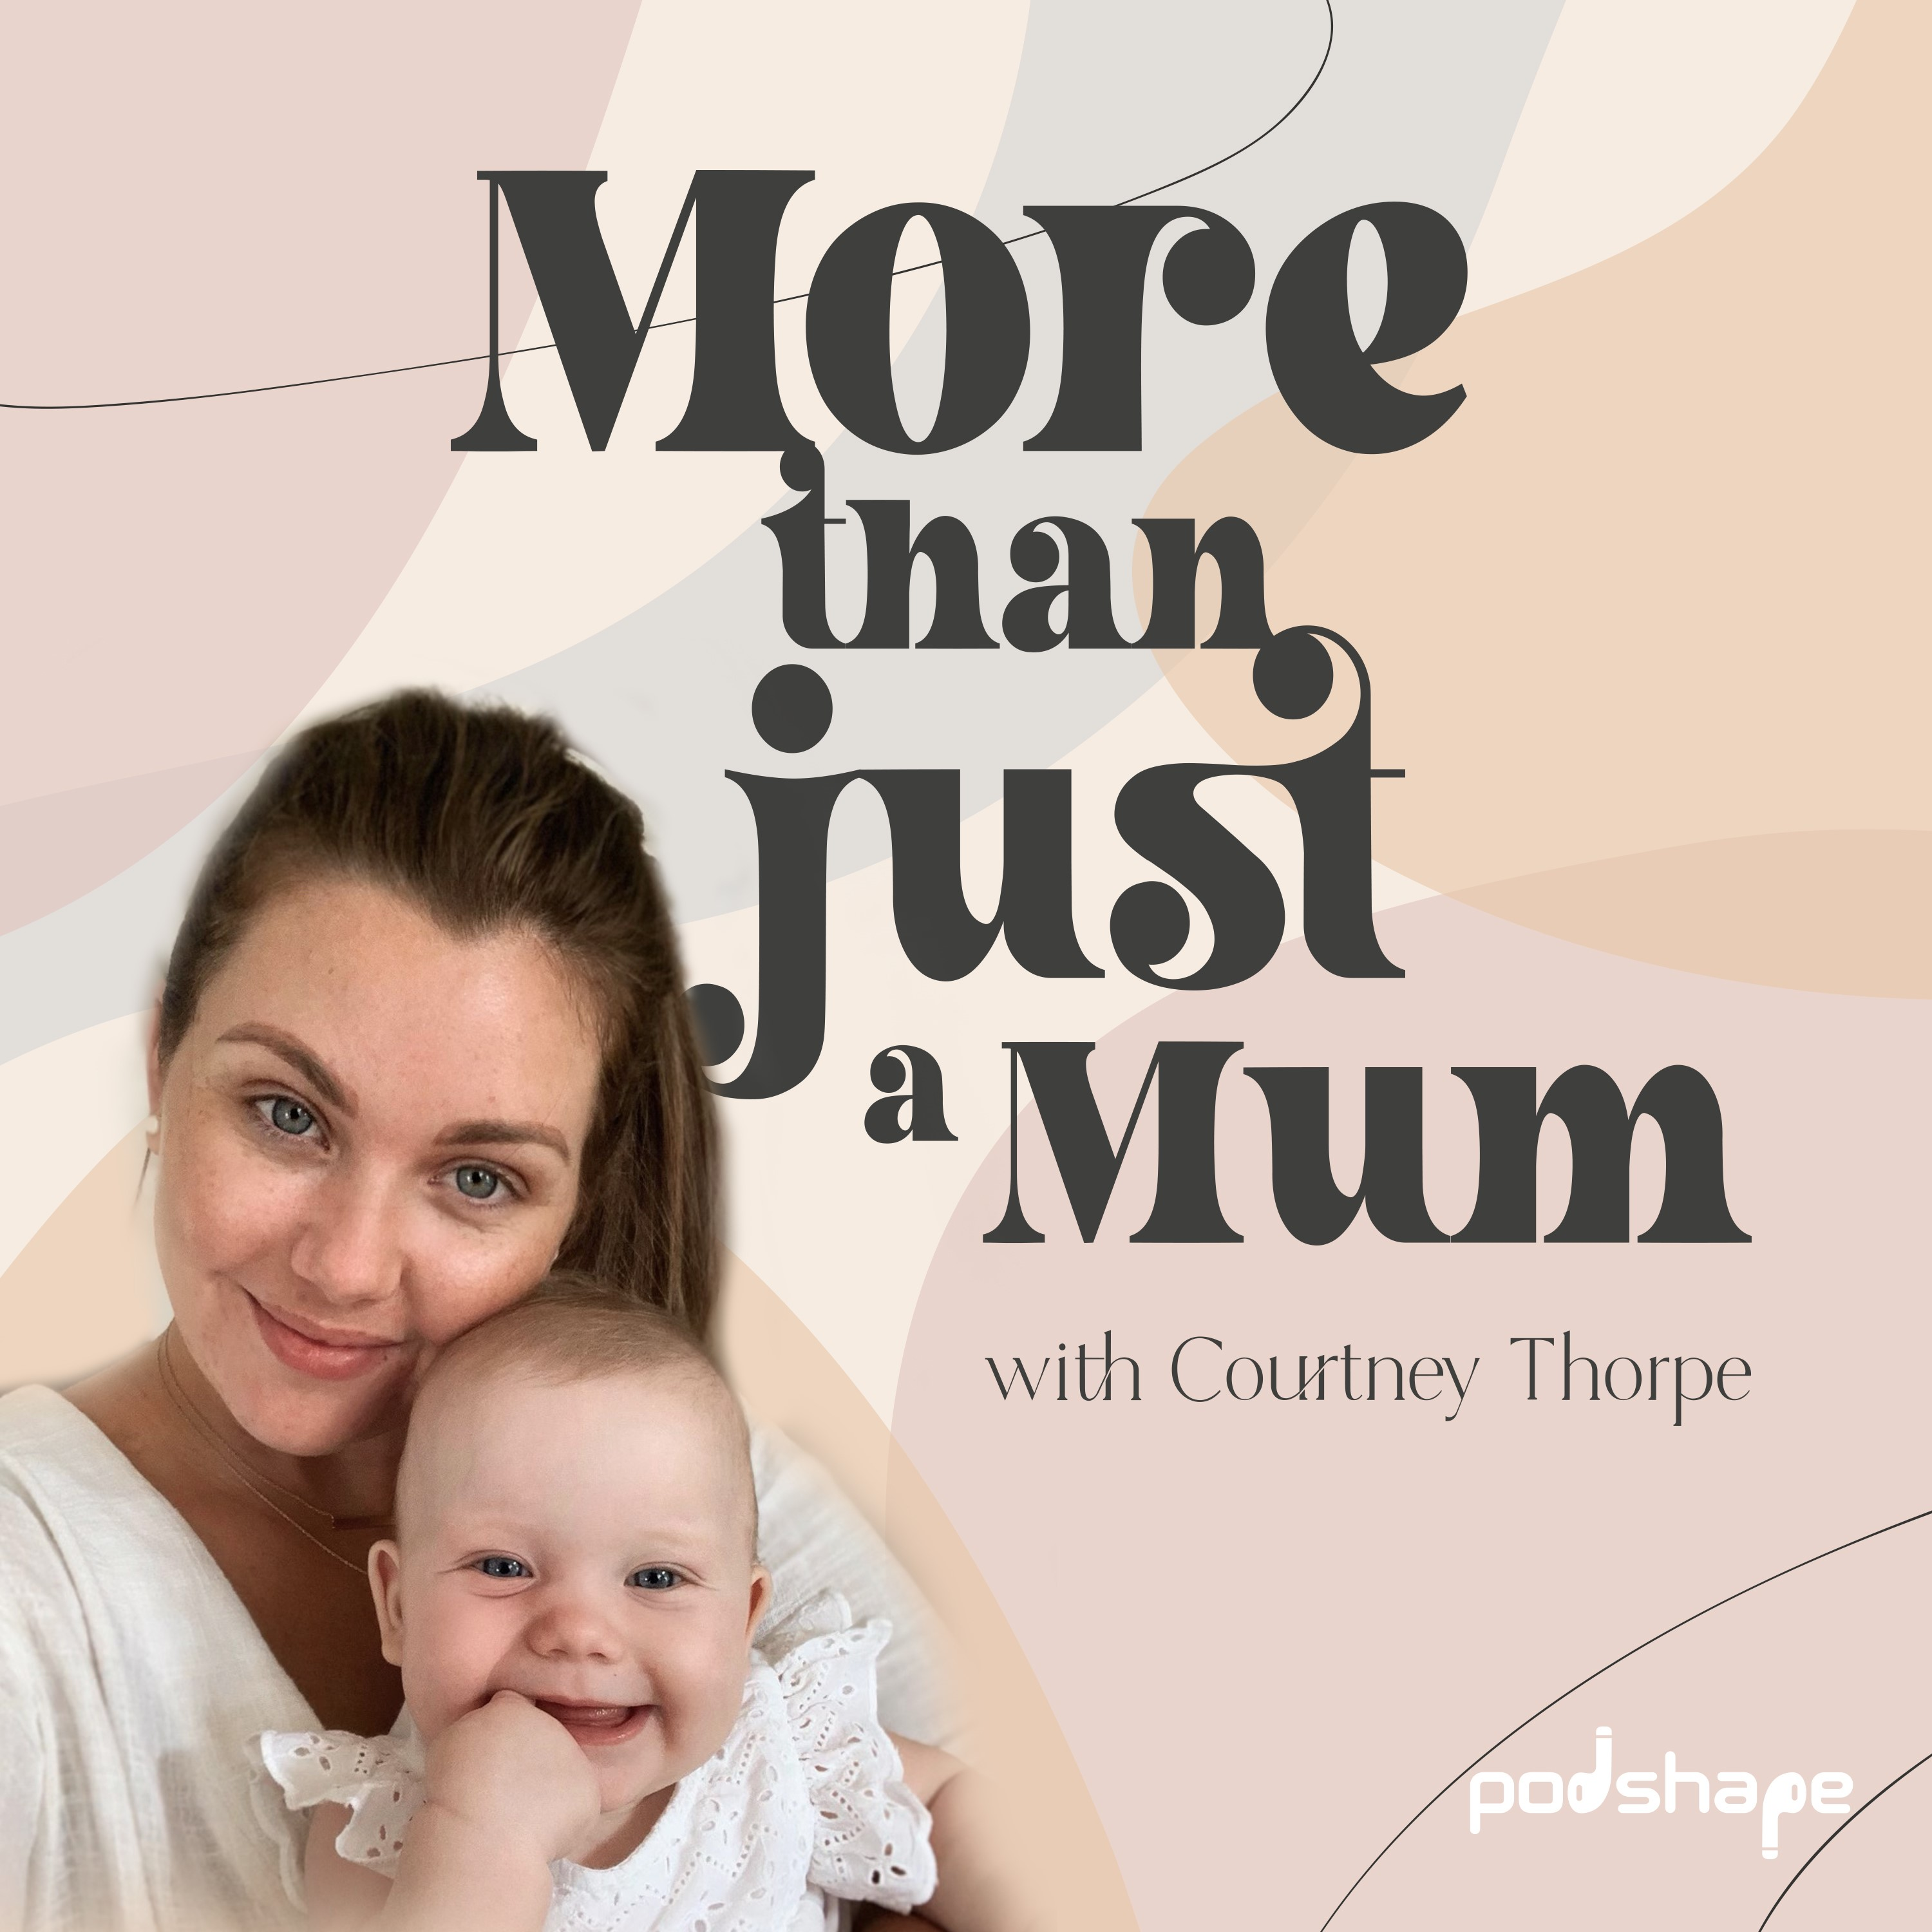 I am Courtney Thorpe, more than just a Mum